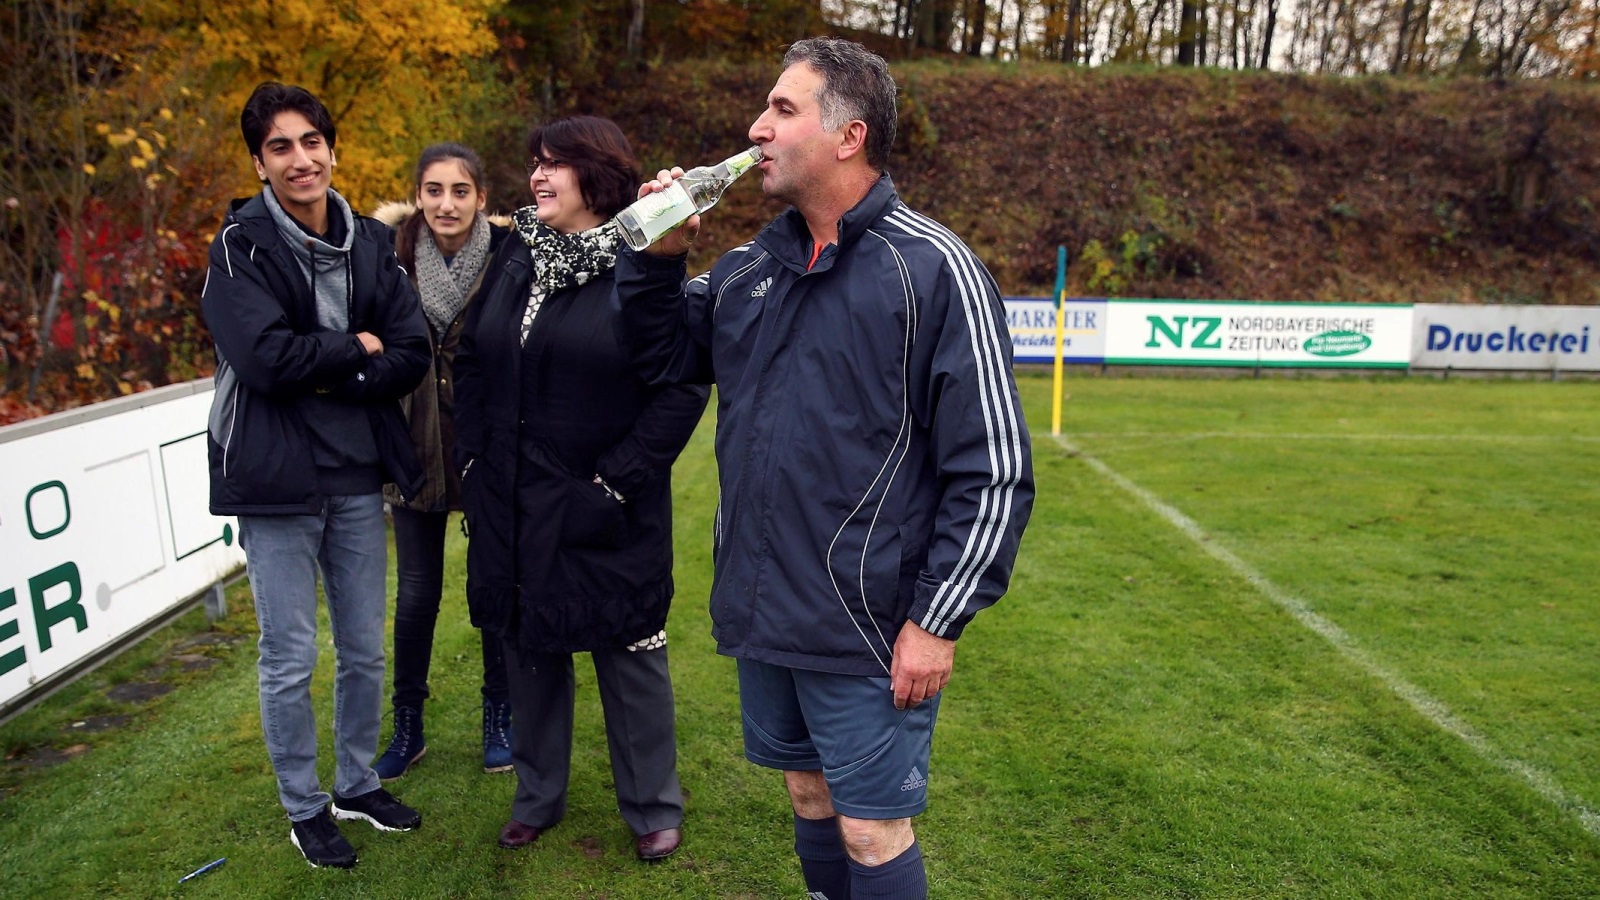 Former FIFA referee Hamdi Al Kadri with family members at half time during a German 9th division soccer match between TSV Pyrbaum and FC Altdorf in Pyrbaum, southern Germany, November 6, 2016. Picture taken November 6, 2016. Syrian migrant Al-Kadri was member of the referee team at high level FIFA matches, such as World Cup bouts before he came to Germany as a Syrian refugee.      REUTERS/Michael Dalder